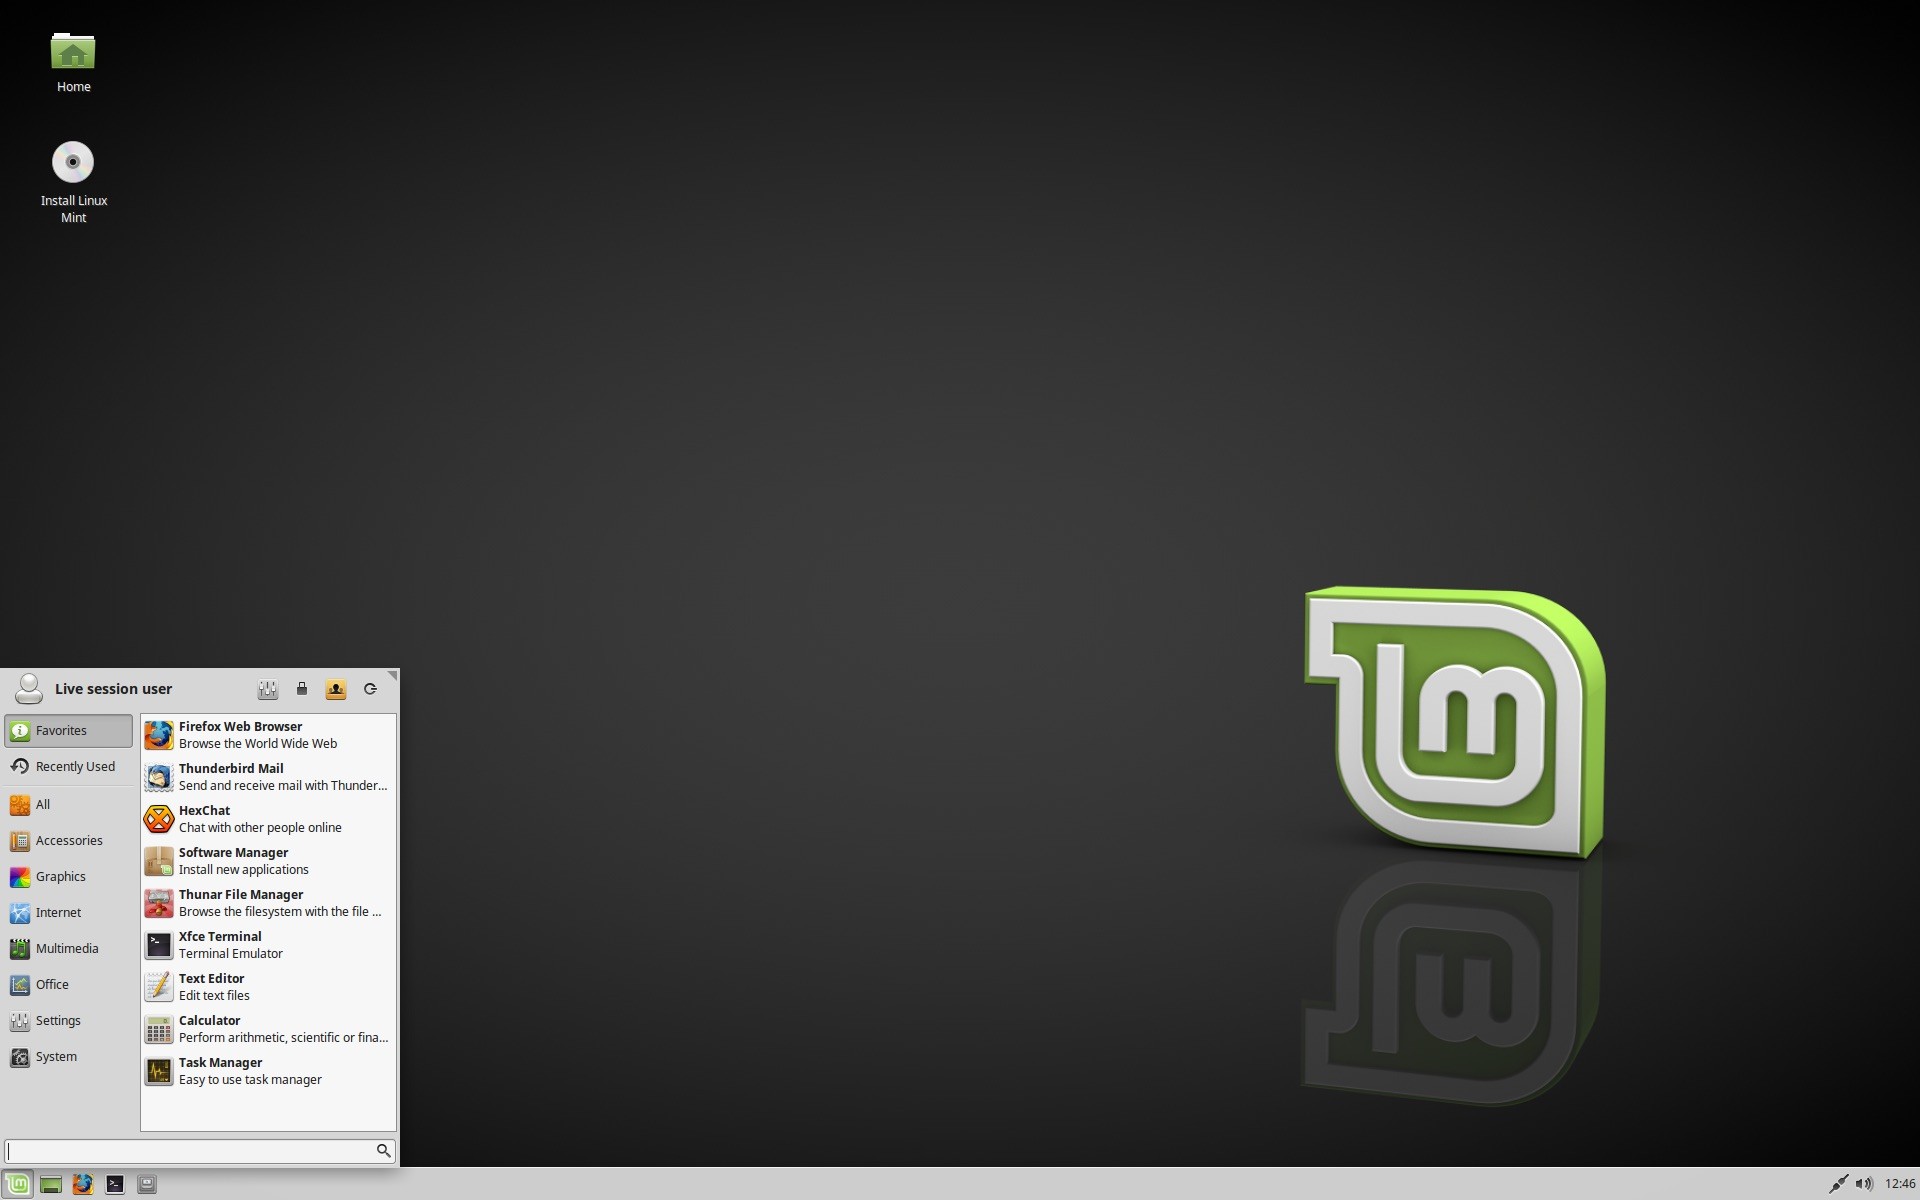 linux-mint-18-3-sylvia-kde-and-xfce-editions-officially-released-download-now-519005-3.jpg